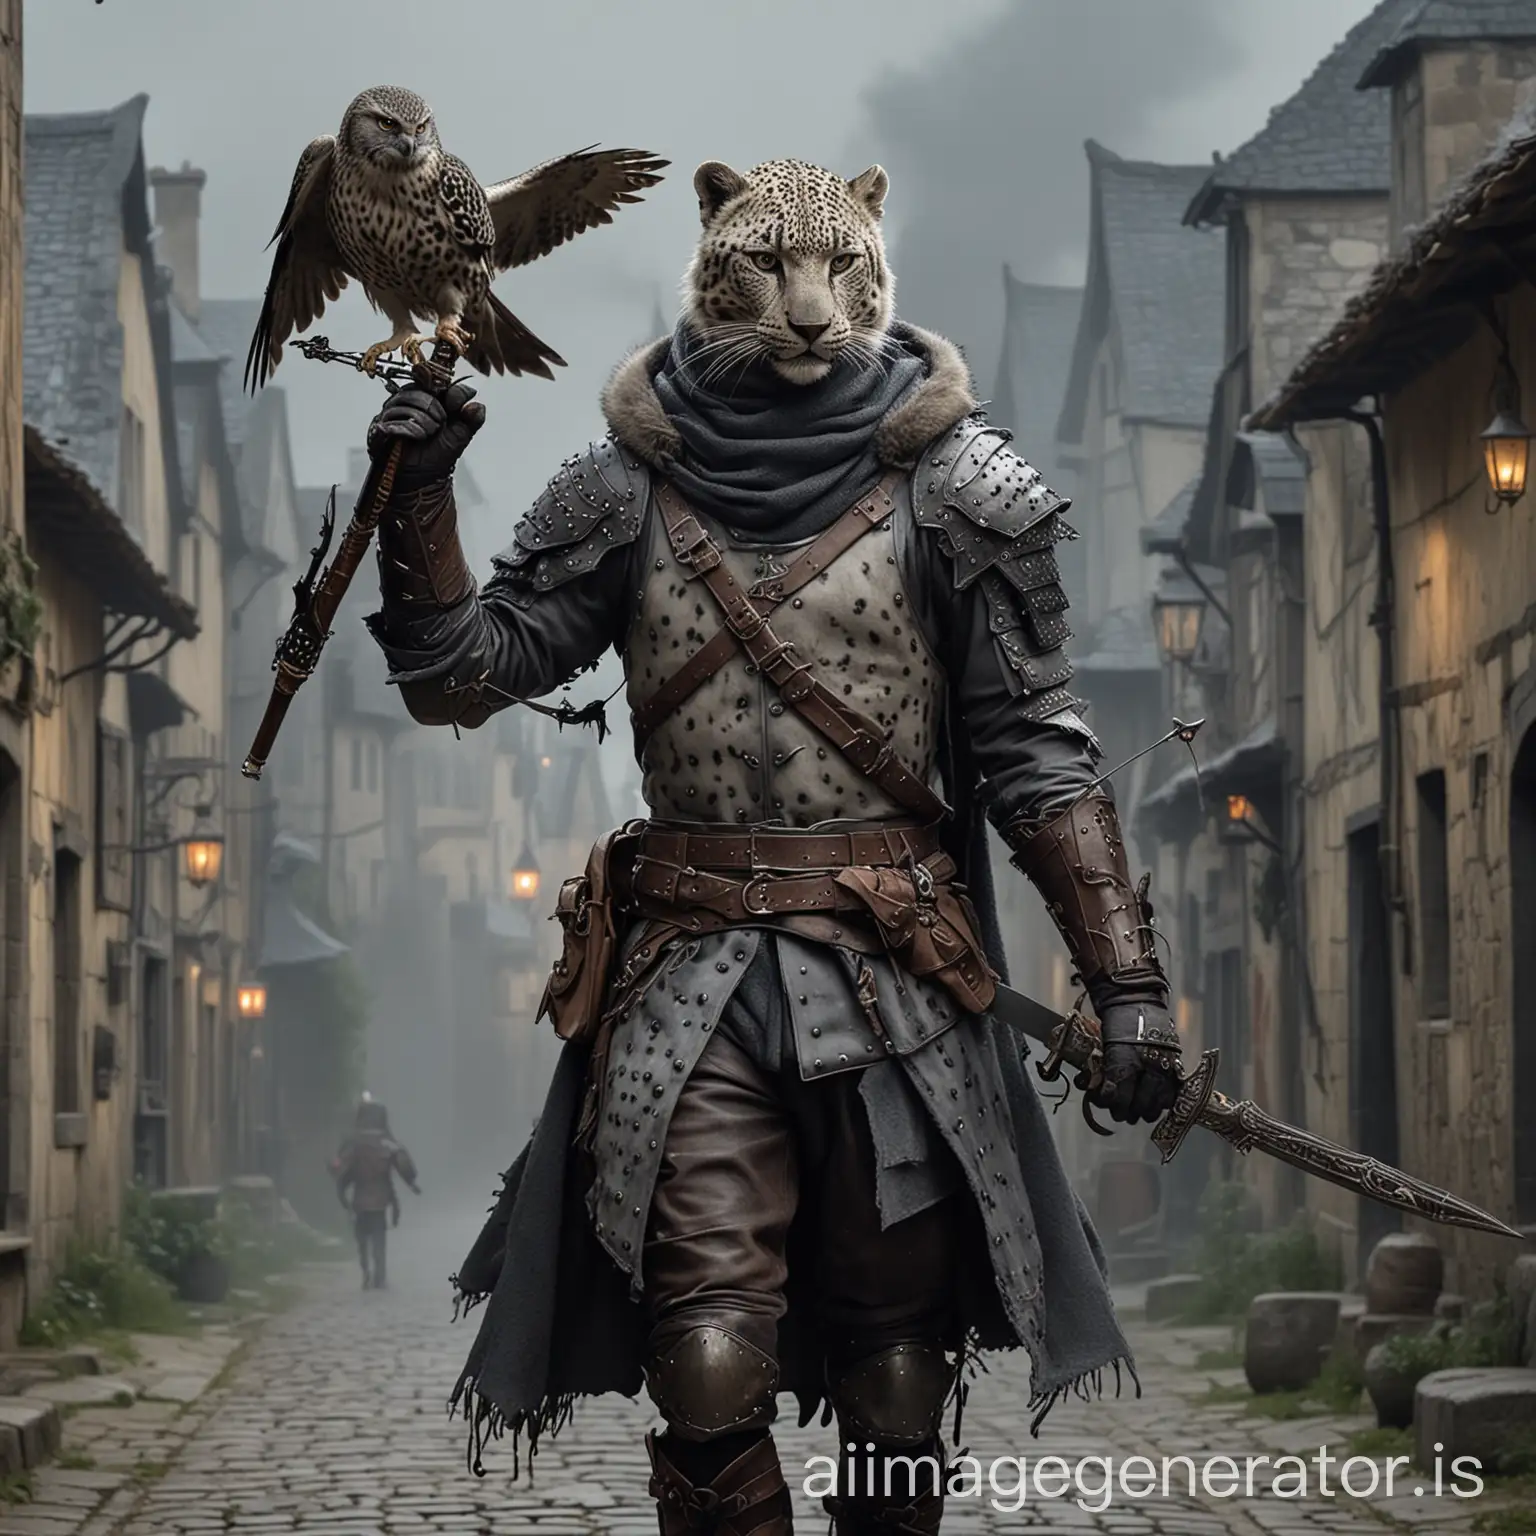 A realistic full body image of a male leopard person with dusky-grey leopard blotches and irregular spots fur, with a medieval soft leather armor, with a grey hood over his head, using a rapier made of dark smoke in one hand, and a hand crossbow on the other, with a little owl flying behind him, in a small medieval village as the scenario, in the night, with the moon on the sky, soft leather armor, soft grey leather armor, holding a hand crossbow, holding a rapier, grey fur face, grey fur hands, with a dark grey fur, face under the dark hood, standing in a dark medieval street